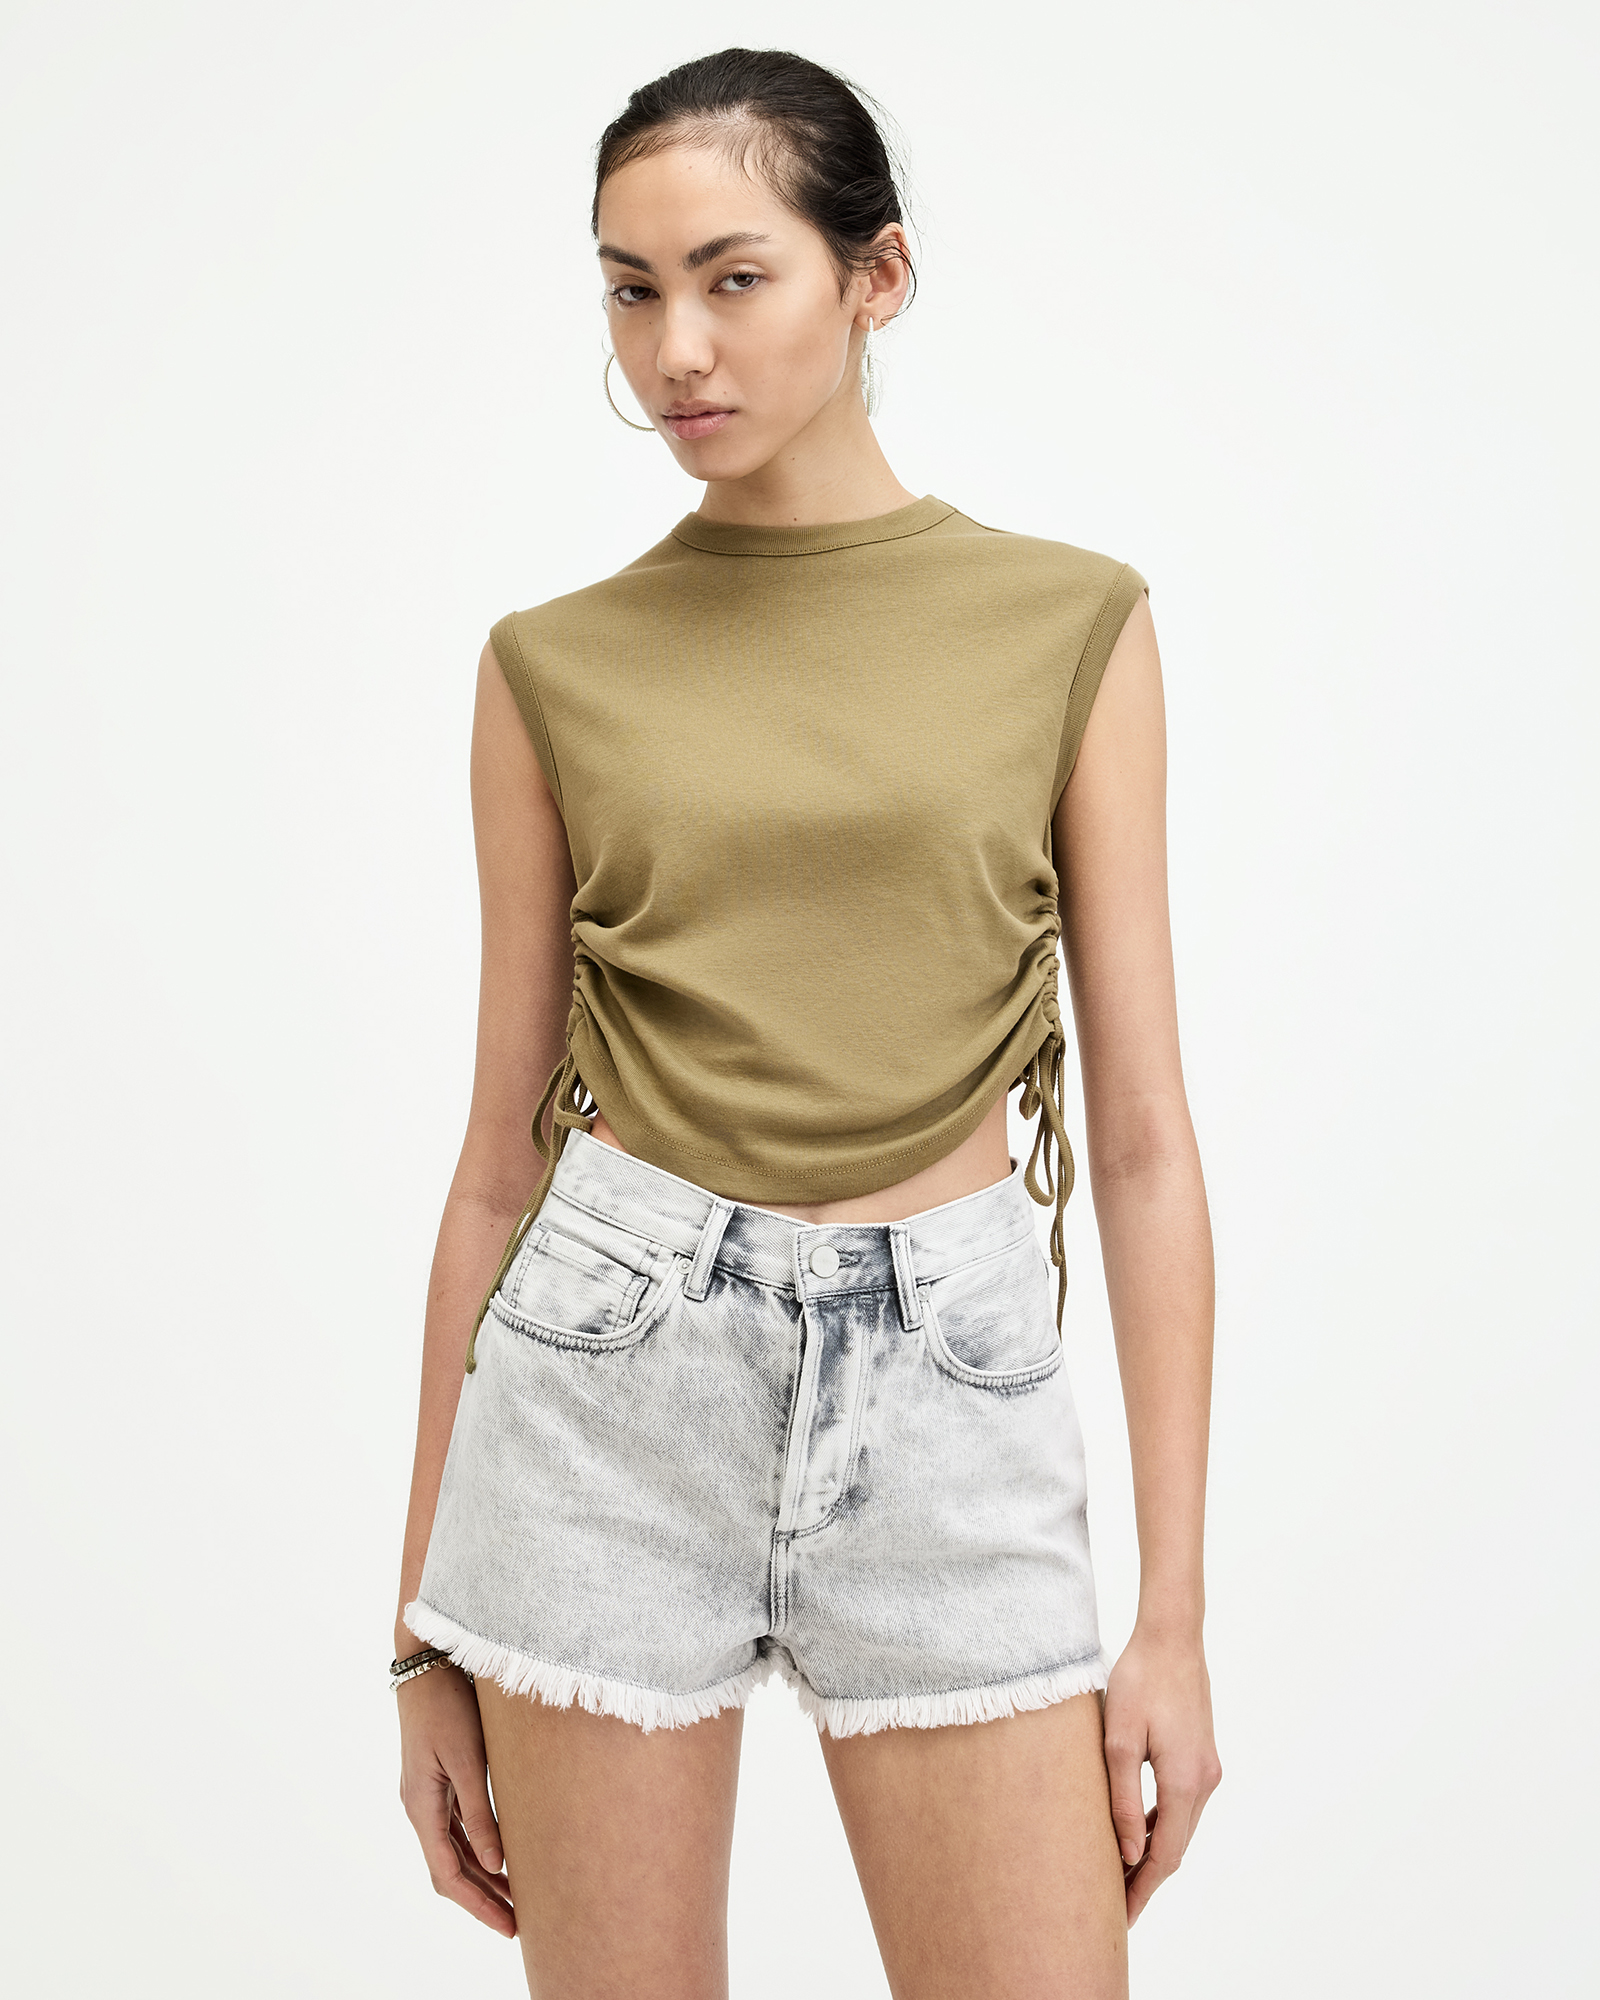 Sonny Side Seam Drawcord Tank Top Olive Green | ALLSAINTS US